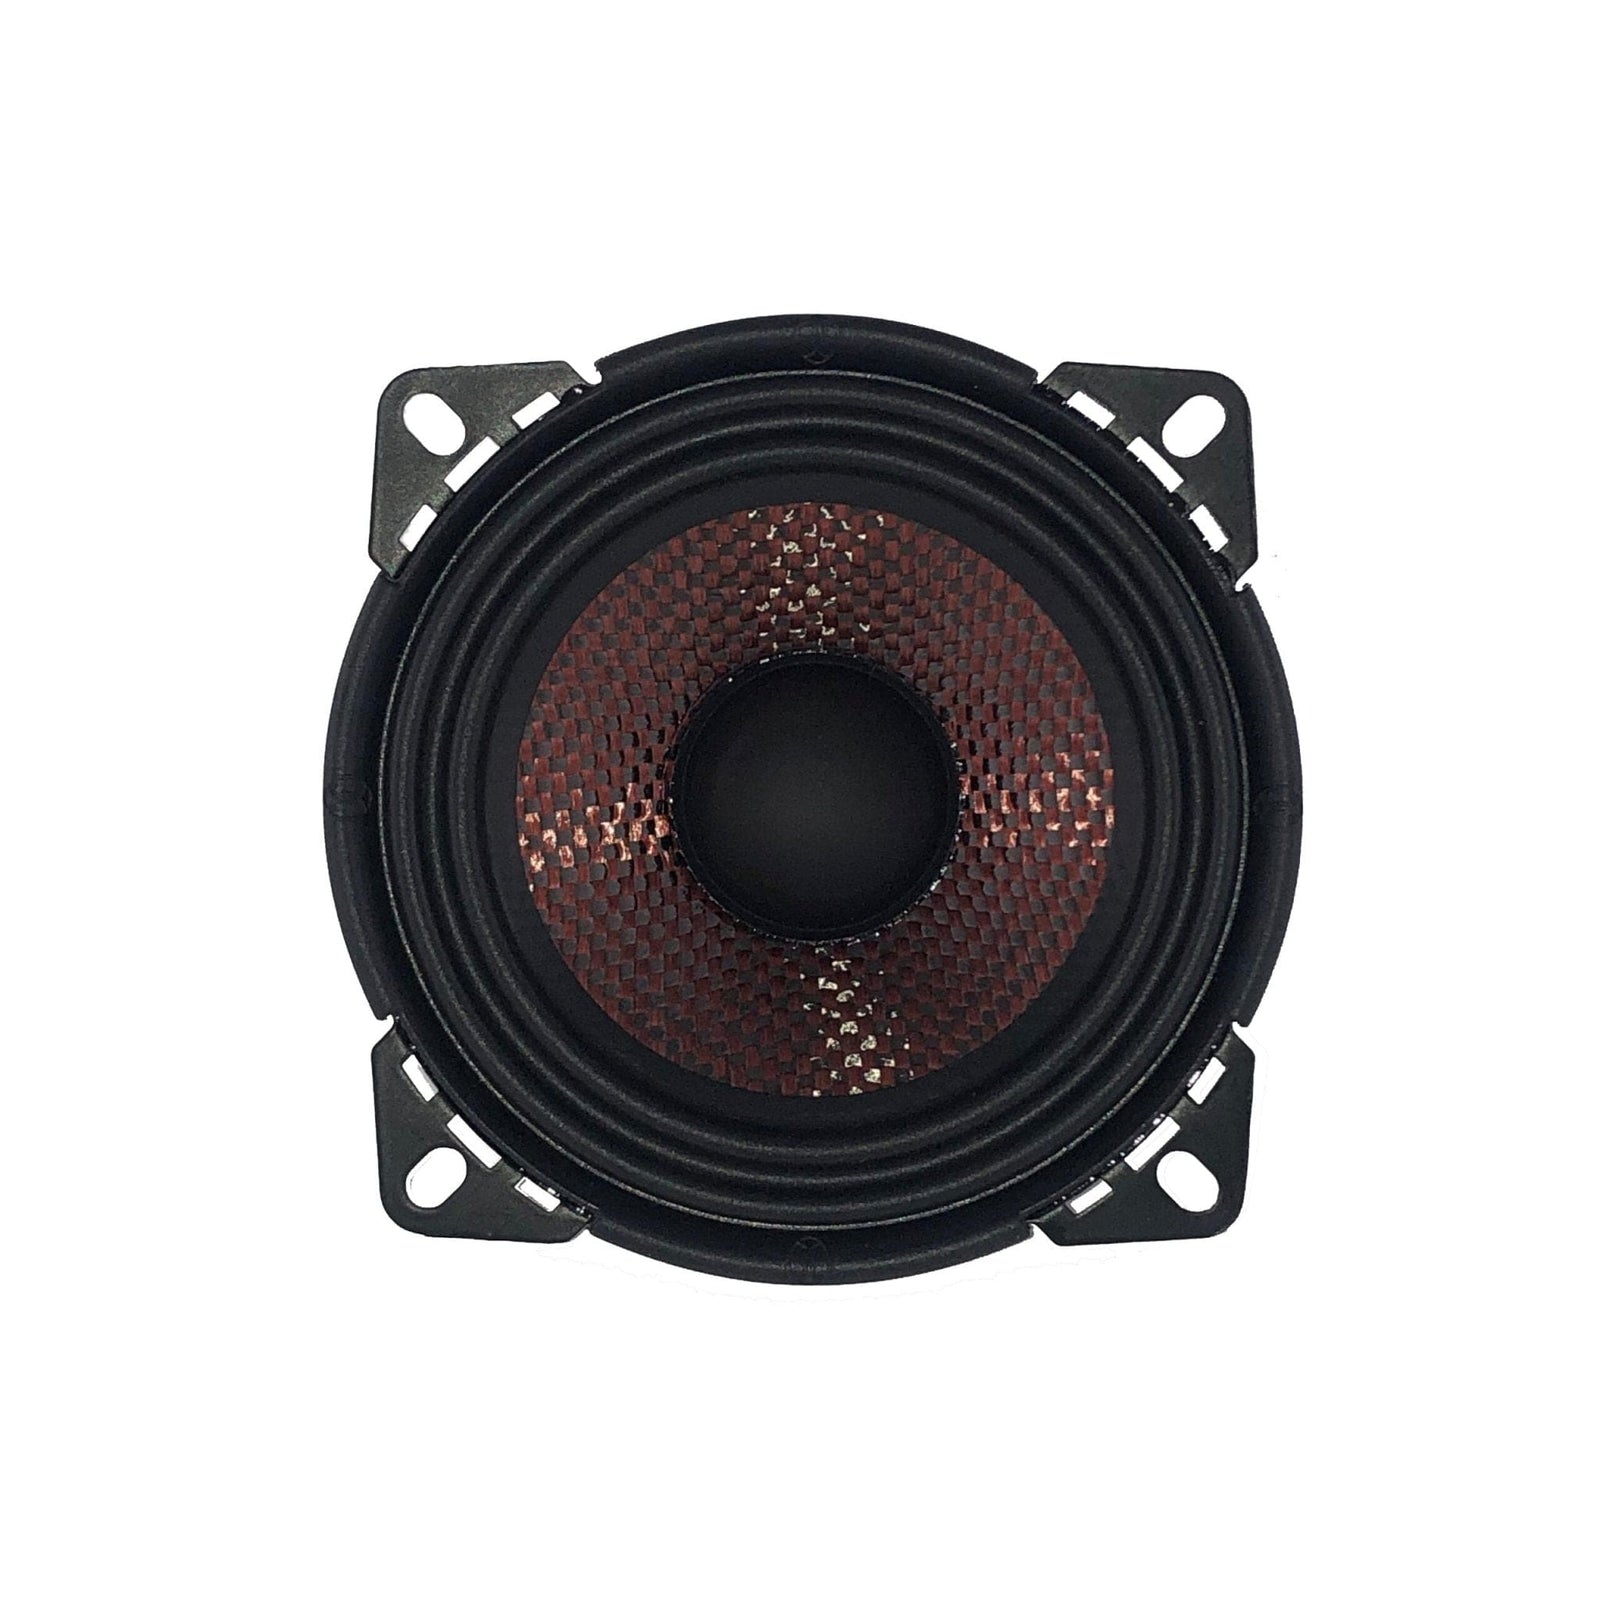 HELIX S 42C.2, 2-way component system, 4 inch / 100 mm